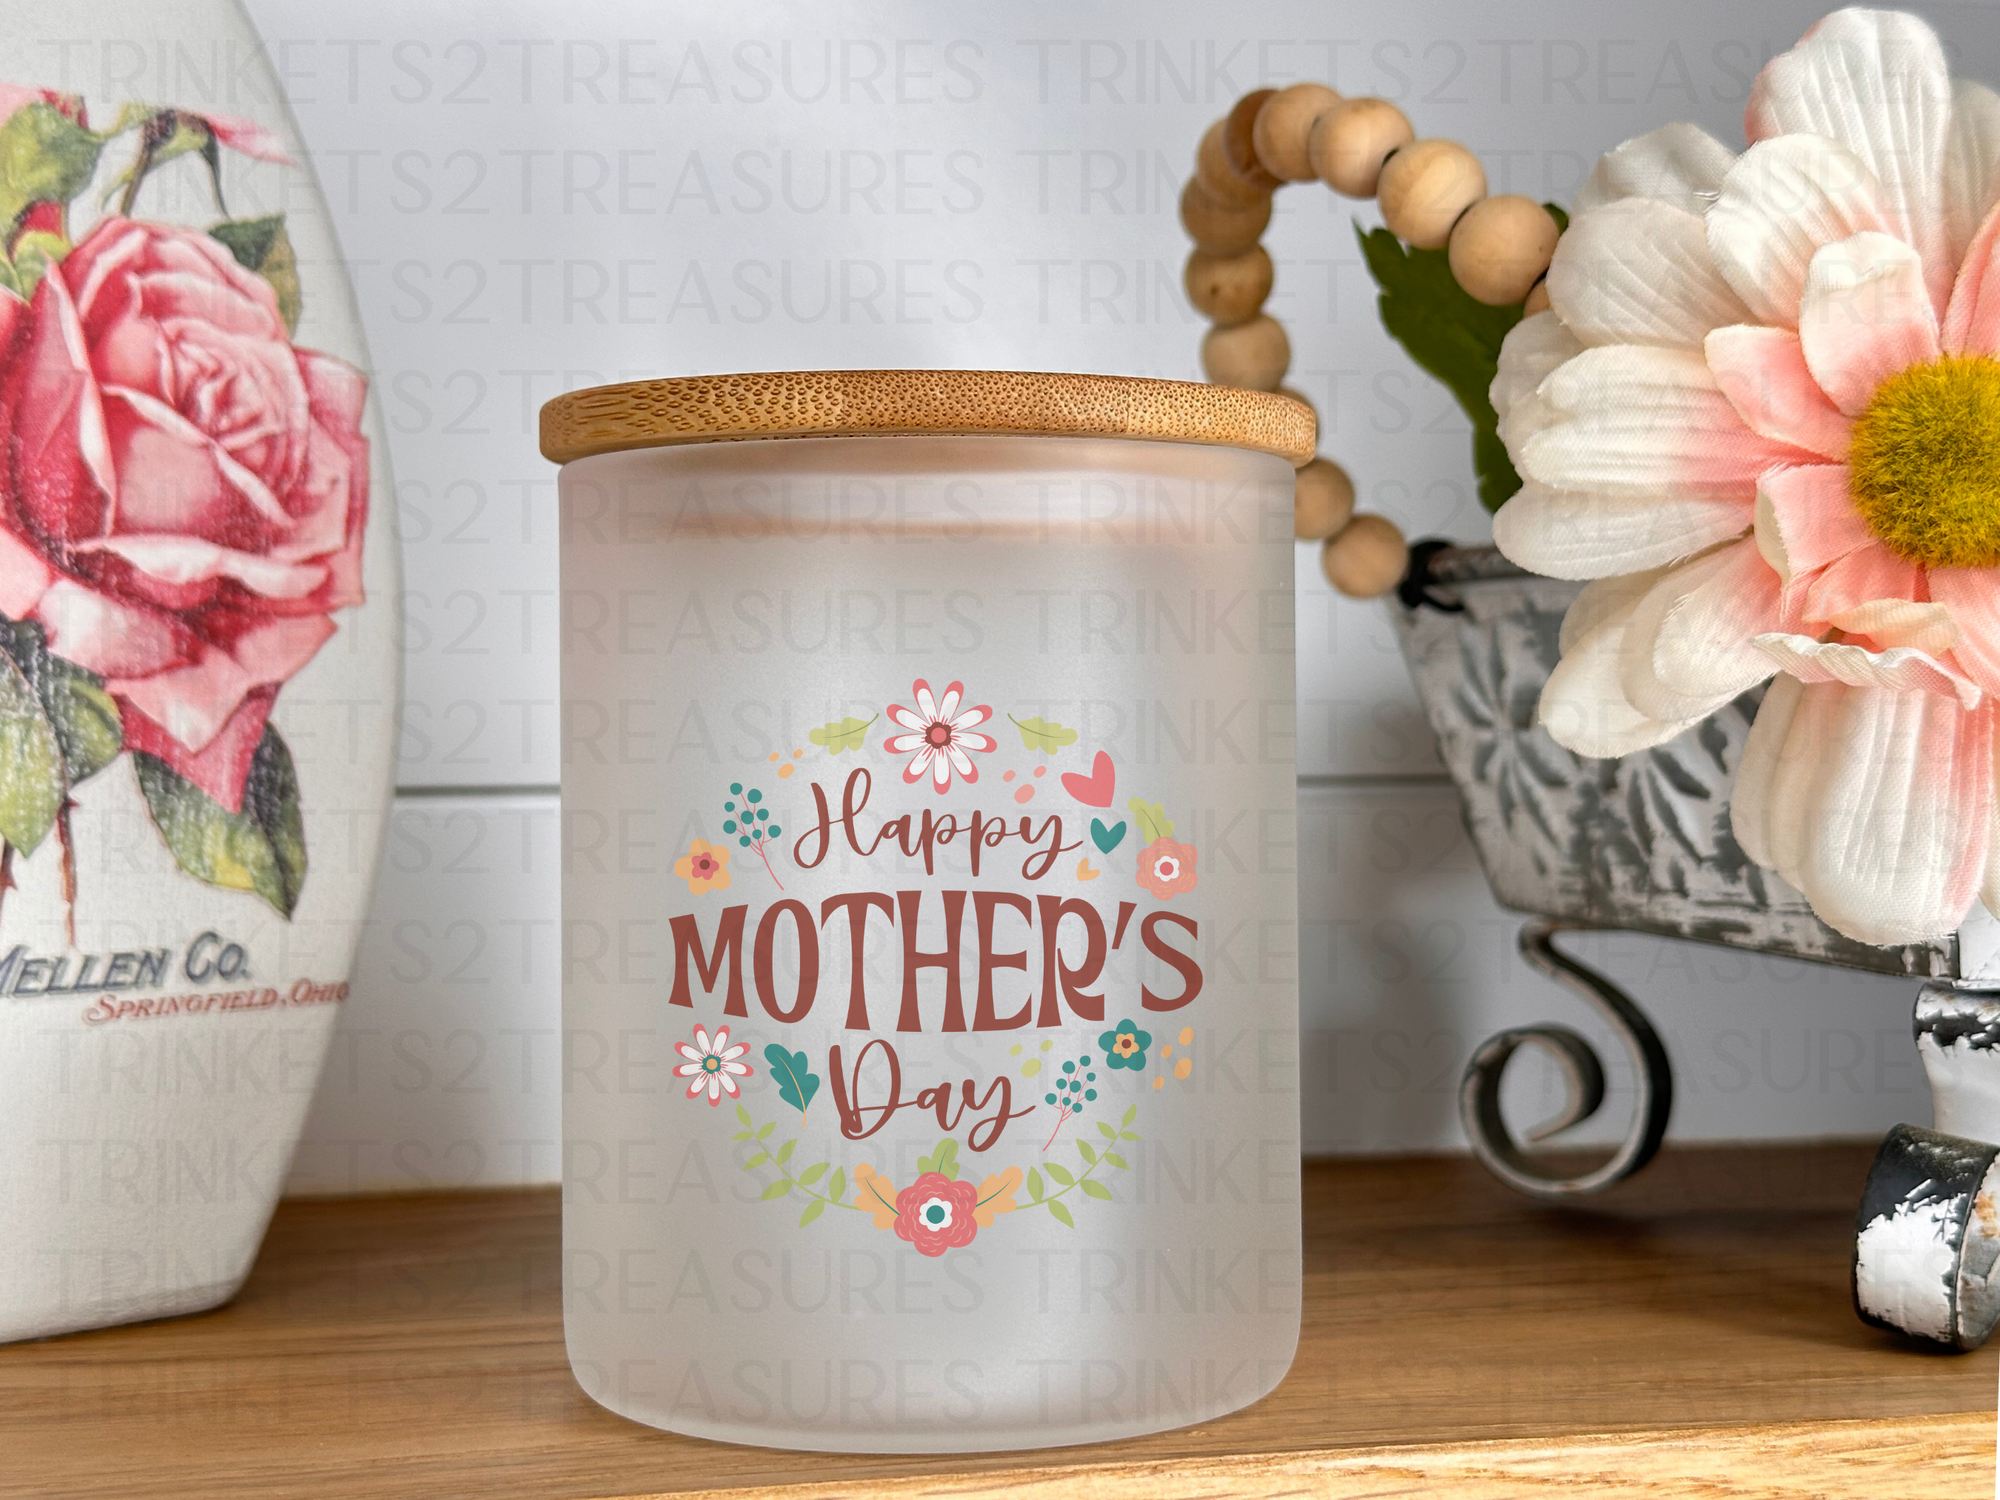 10 oz Frosted Candle Jars with Bamboo Lid/Multi-Purpose Jar/Happy Mother's Day/#501